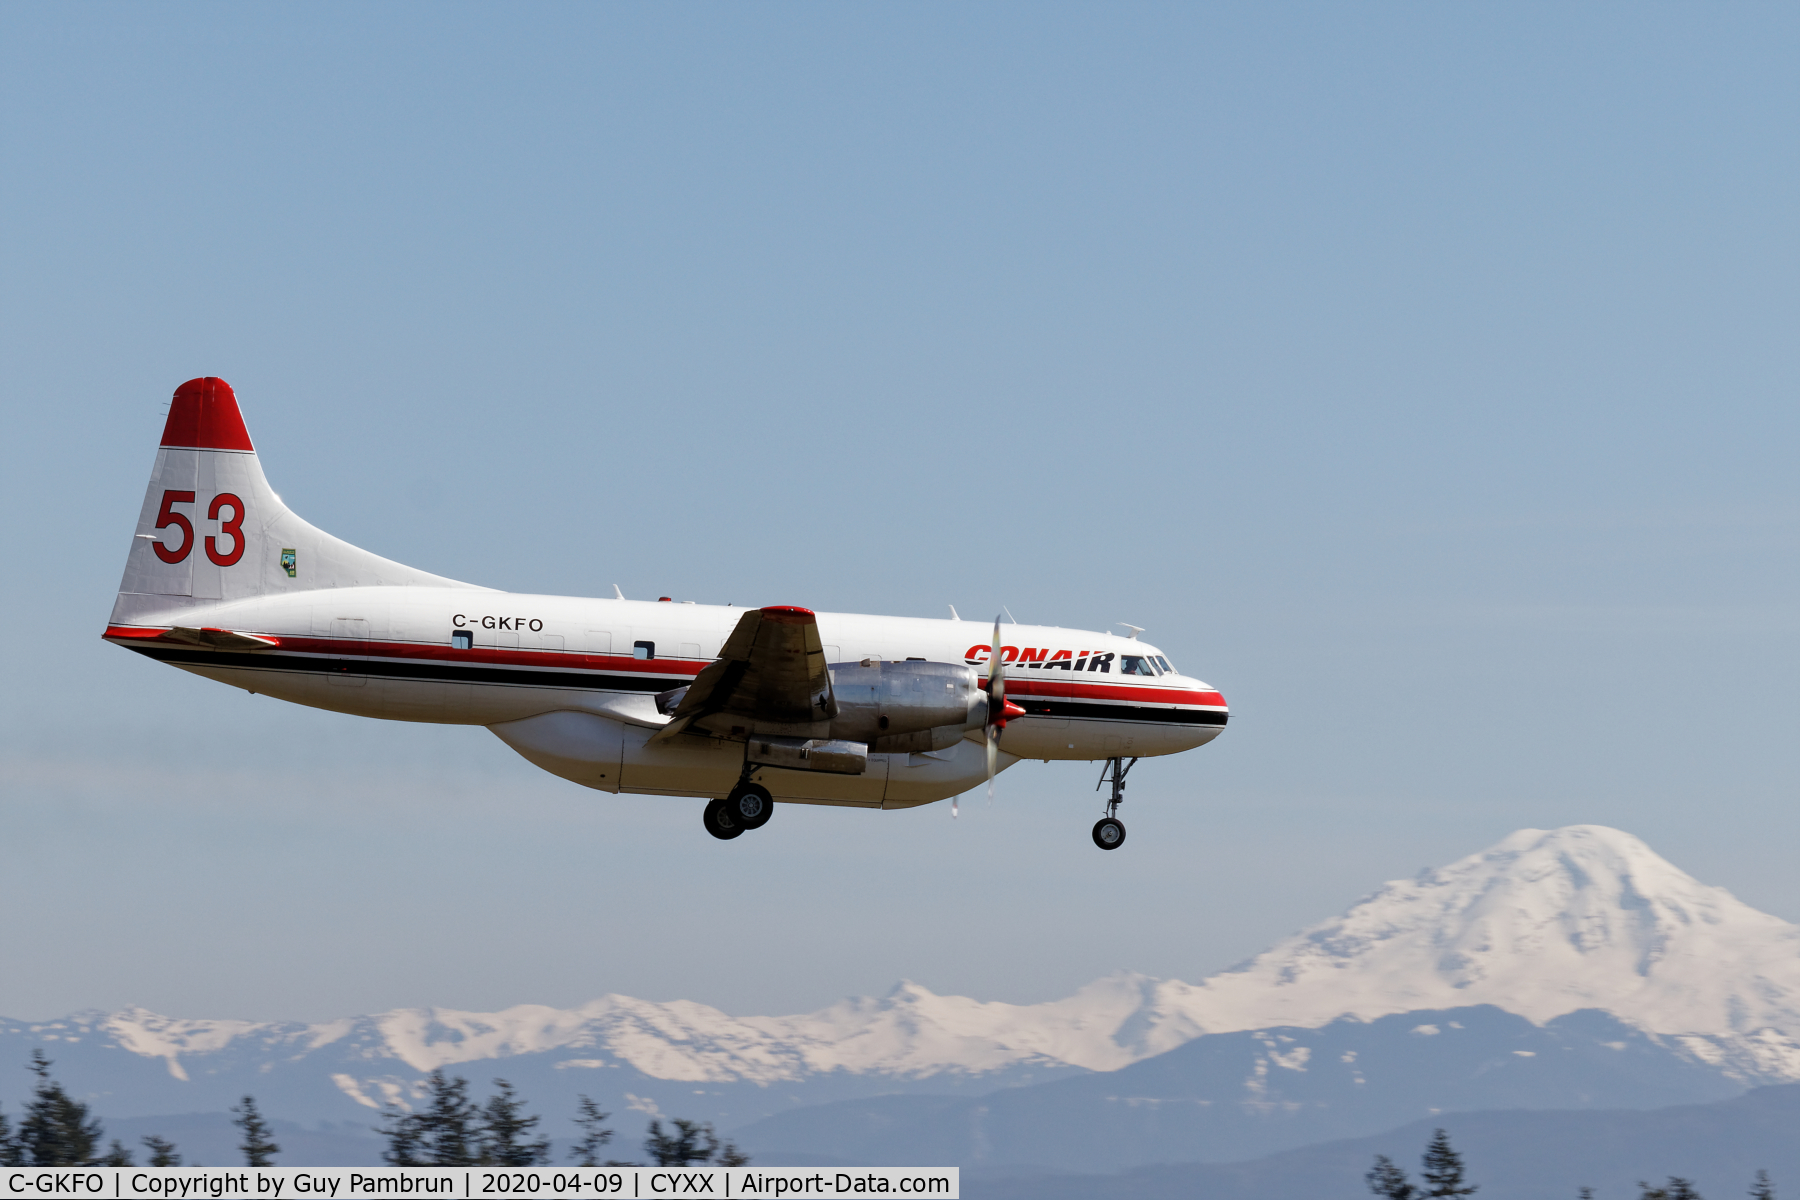 C-GKFO, 1953 Convair 580 C/N 78, Landing on 19 with Mt.Baker, Wa in the background